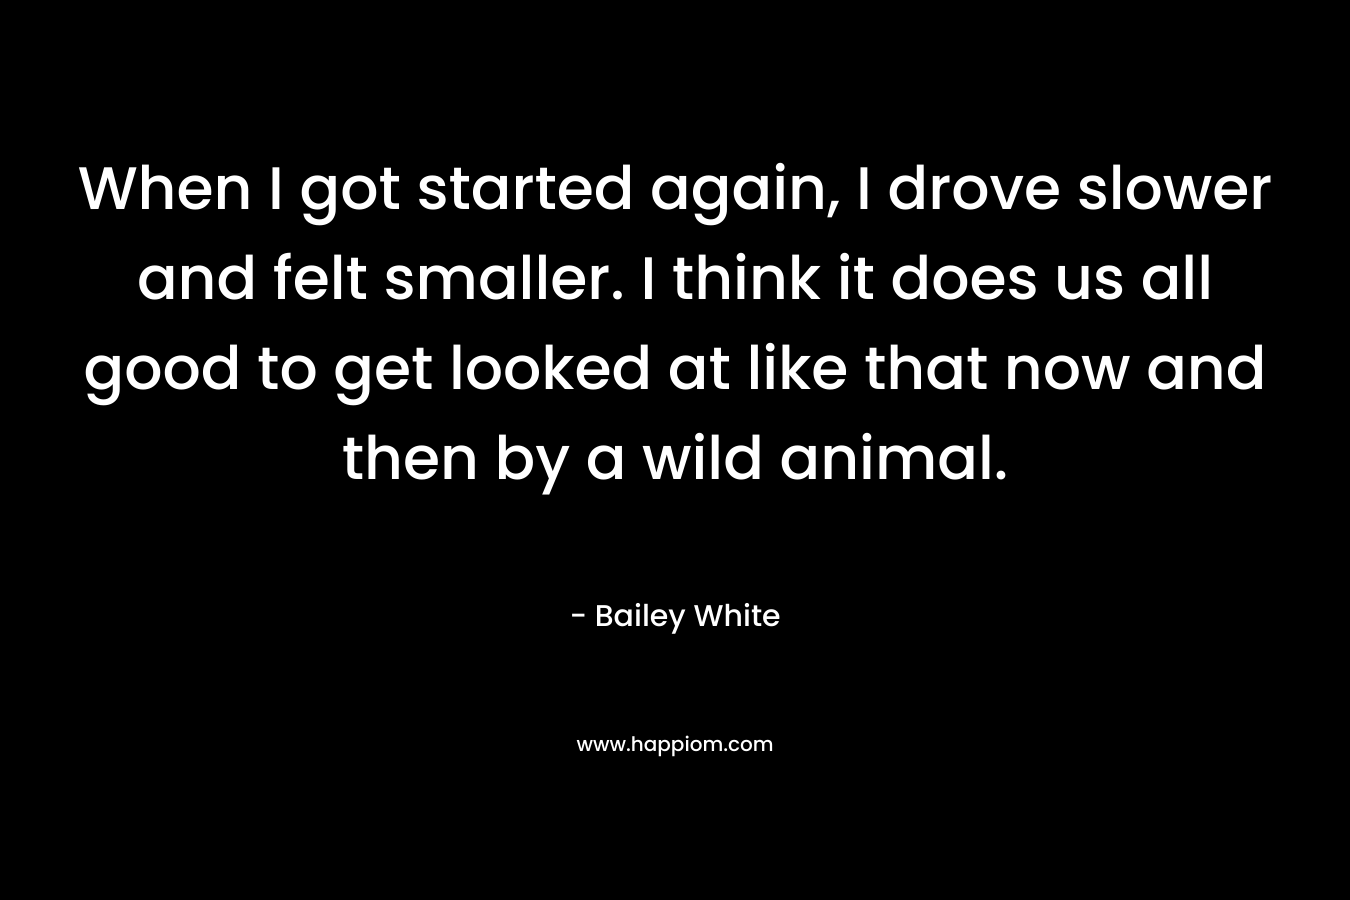 When I got started again, I drove slower and felt smaller. I think it does us all good to get looked at like that now and then by a wild animal.